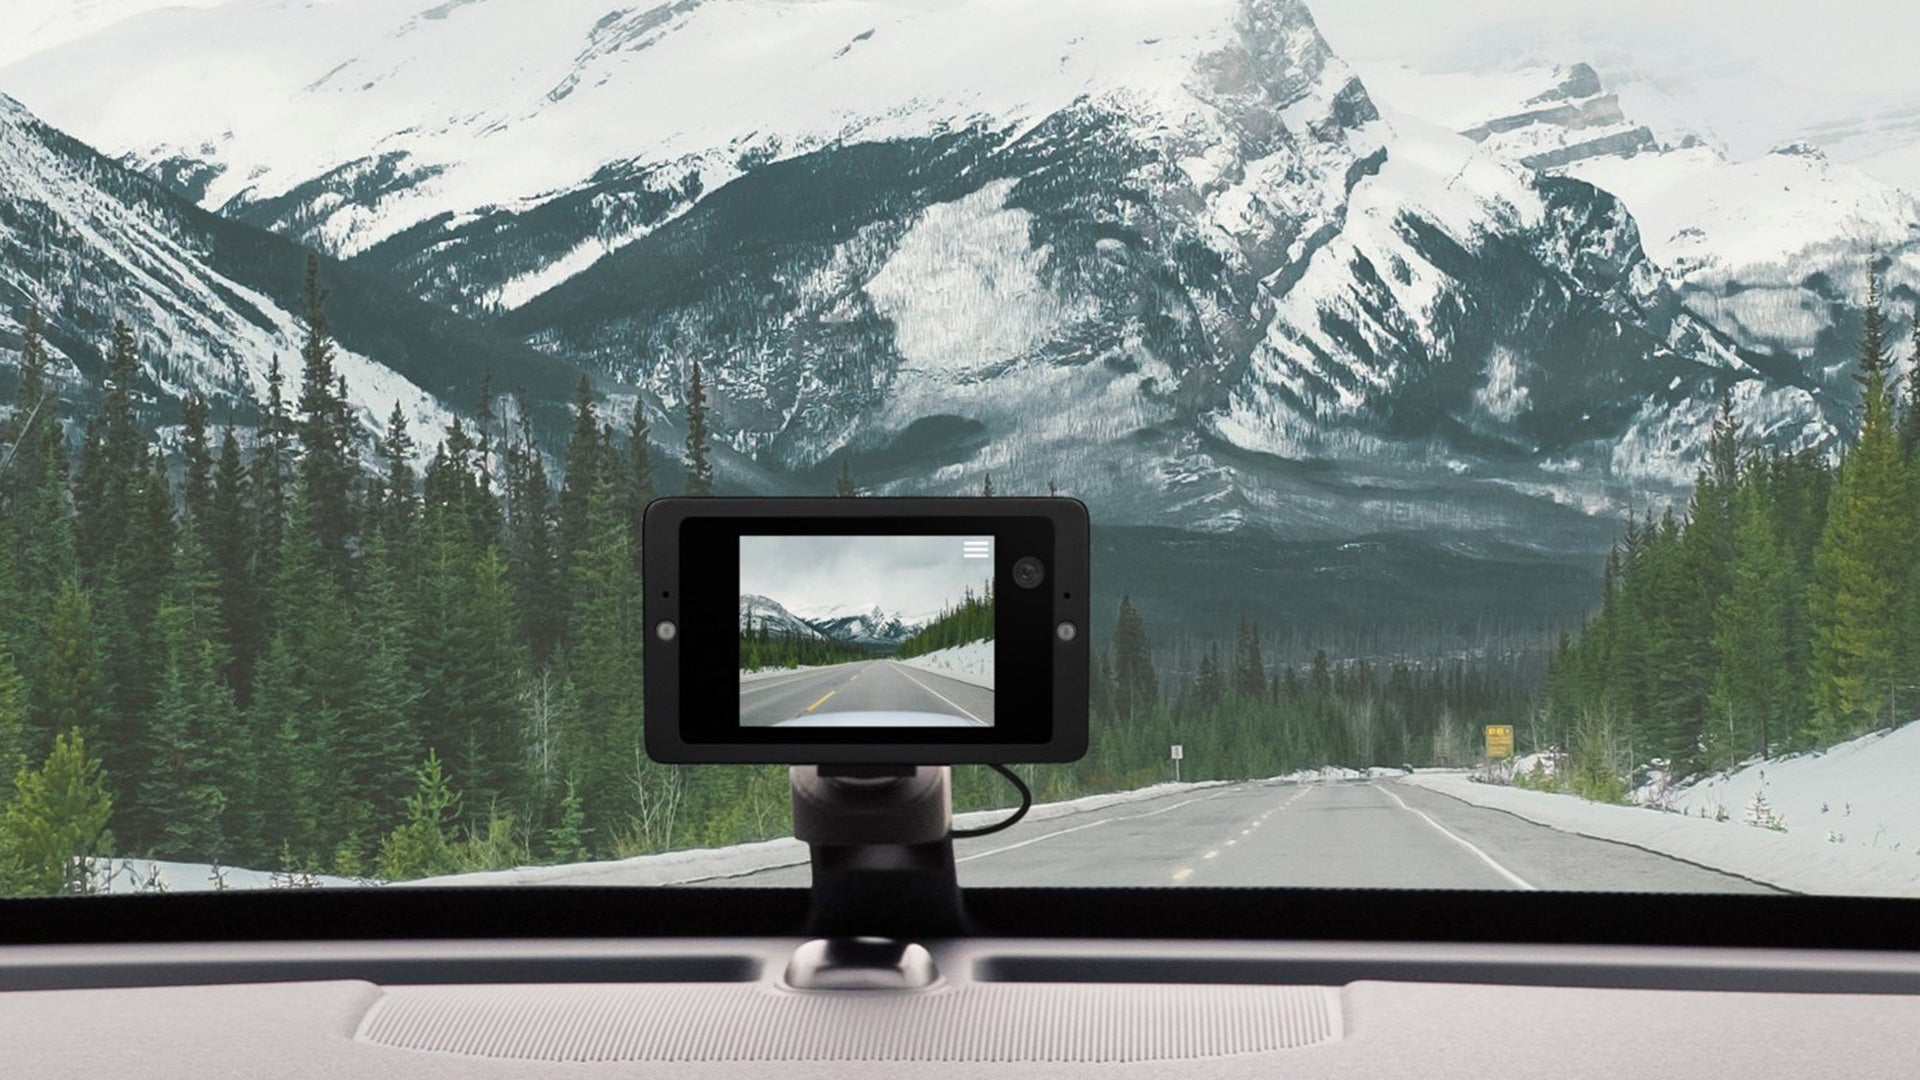 Owl Car Cam Review: The Dashcam to Go For If You Give a Hoot About Filming  Your Daily Drive